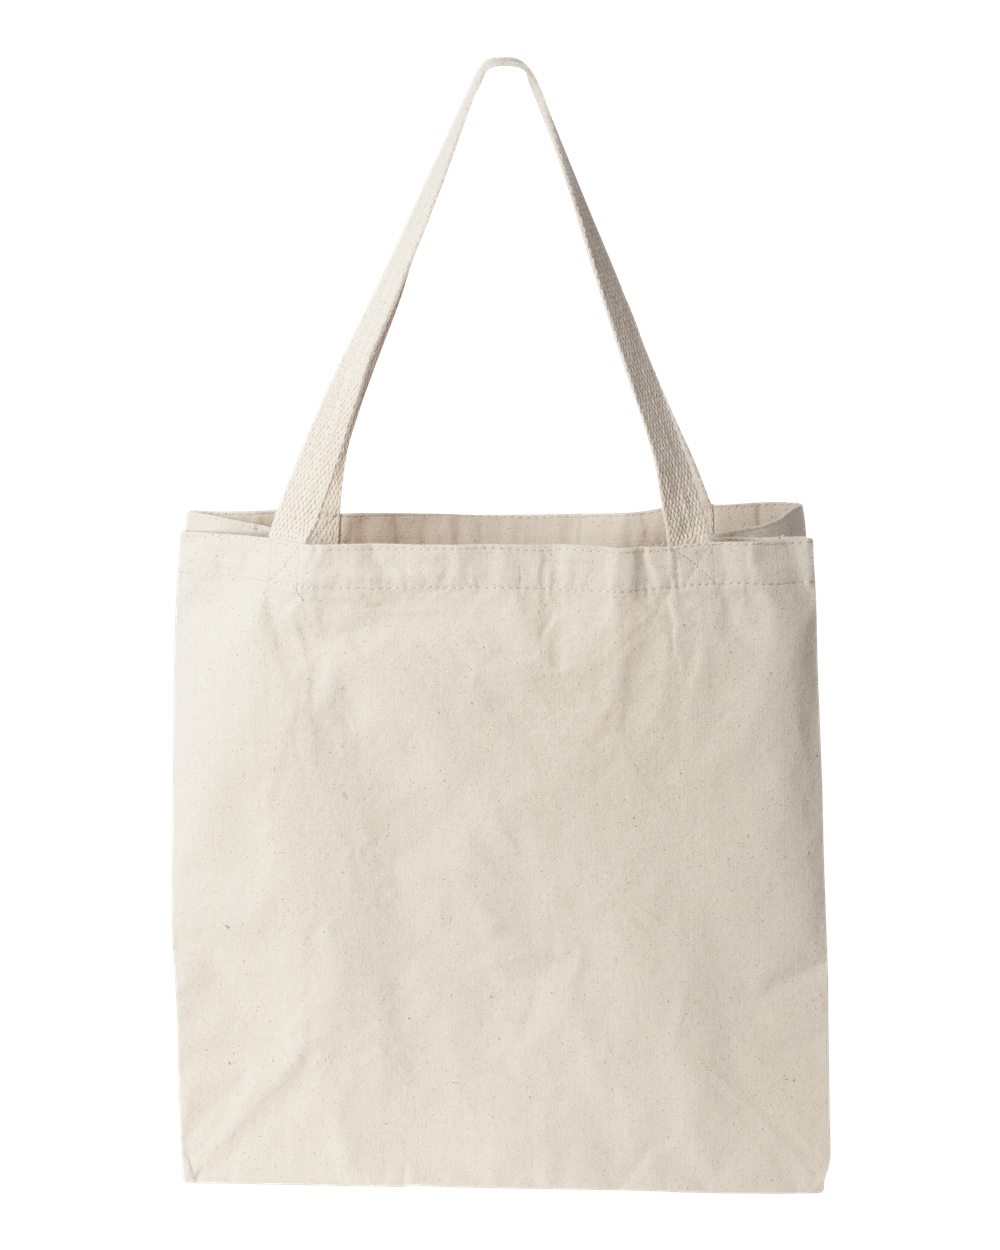 Zippered Cotton Canvas Tote Bag w/ Gusset Top - Natural